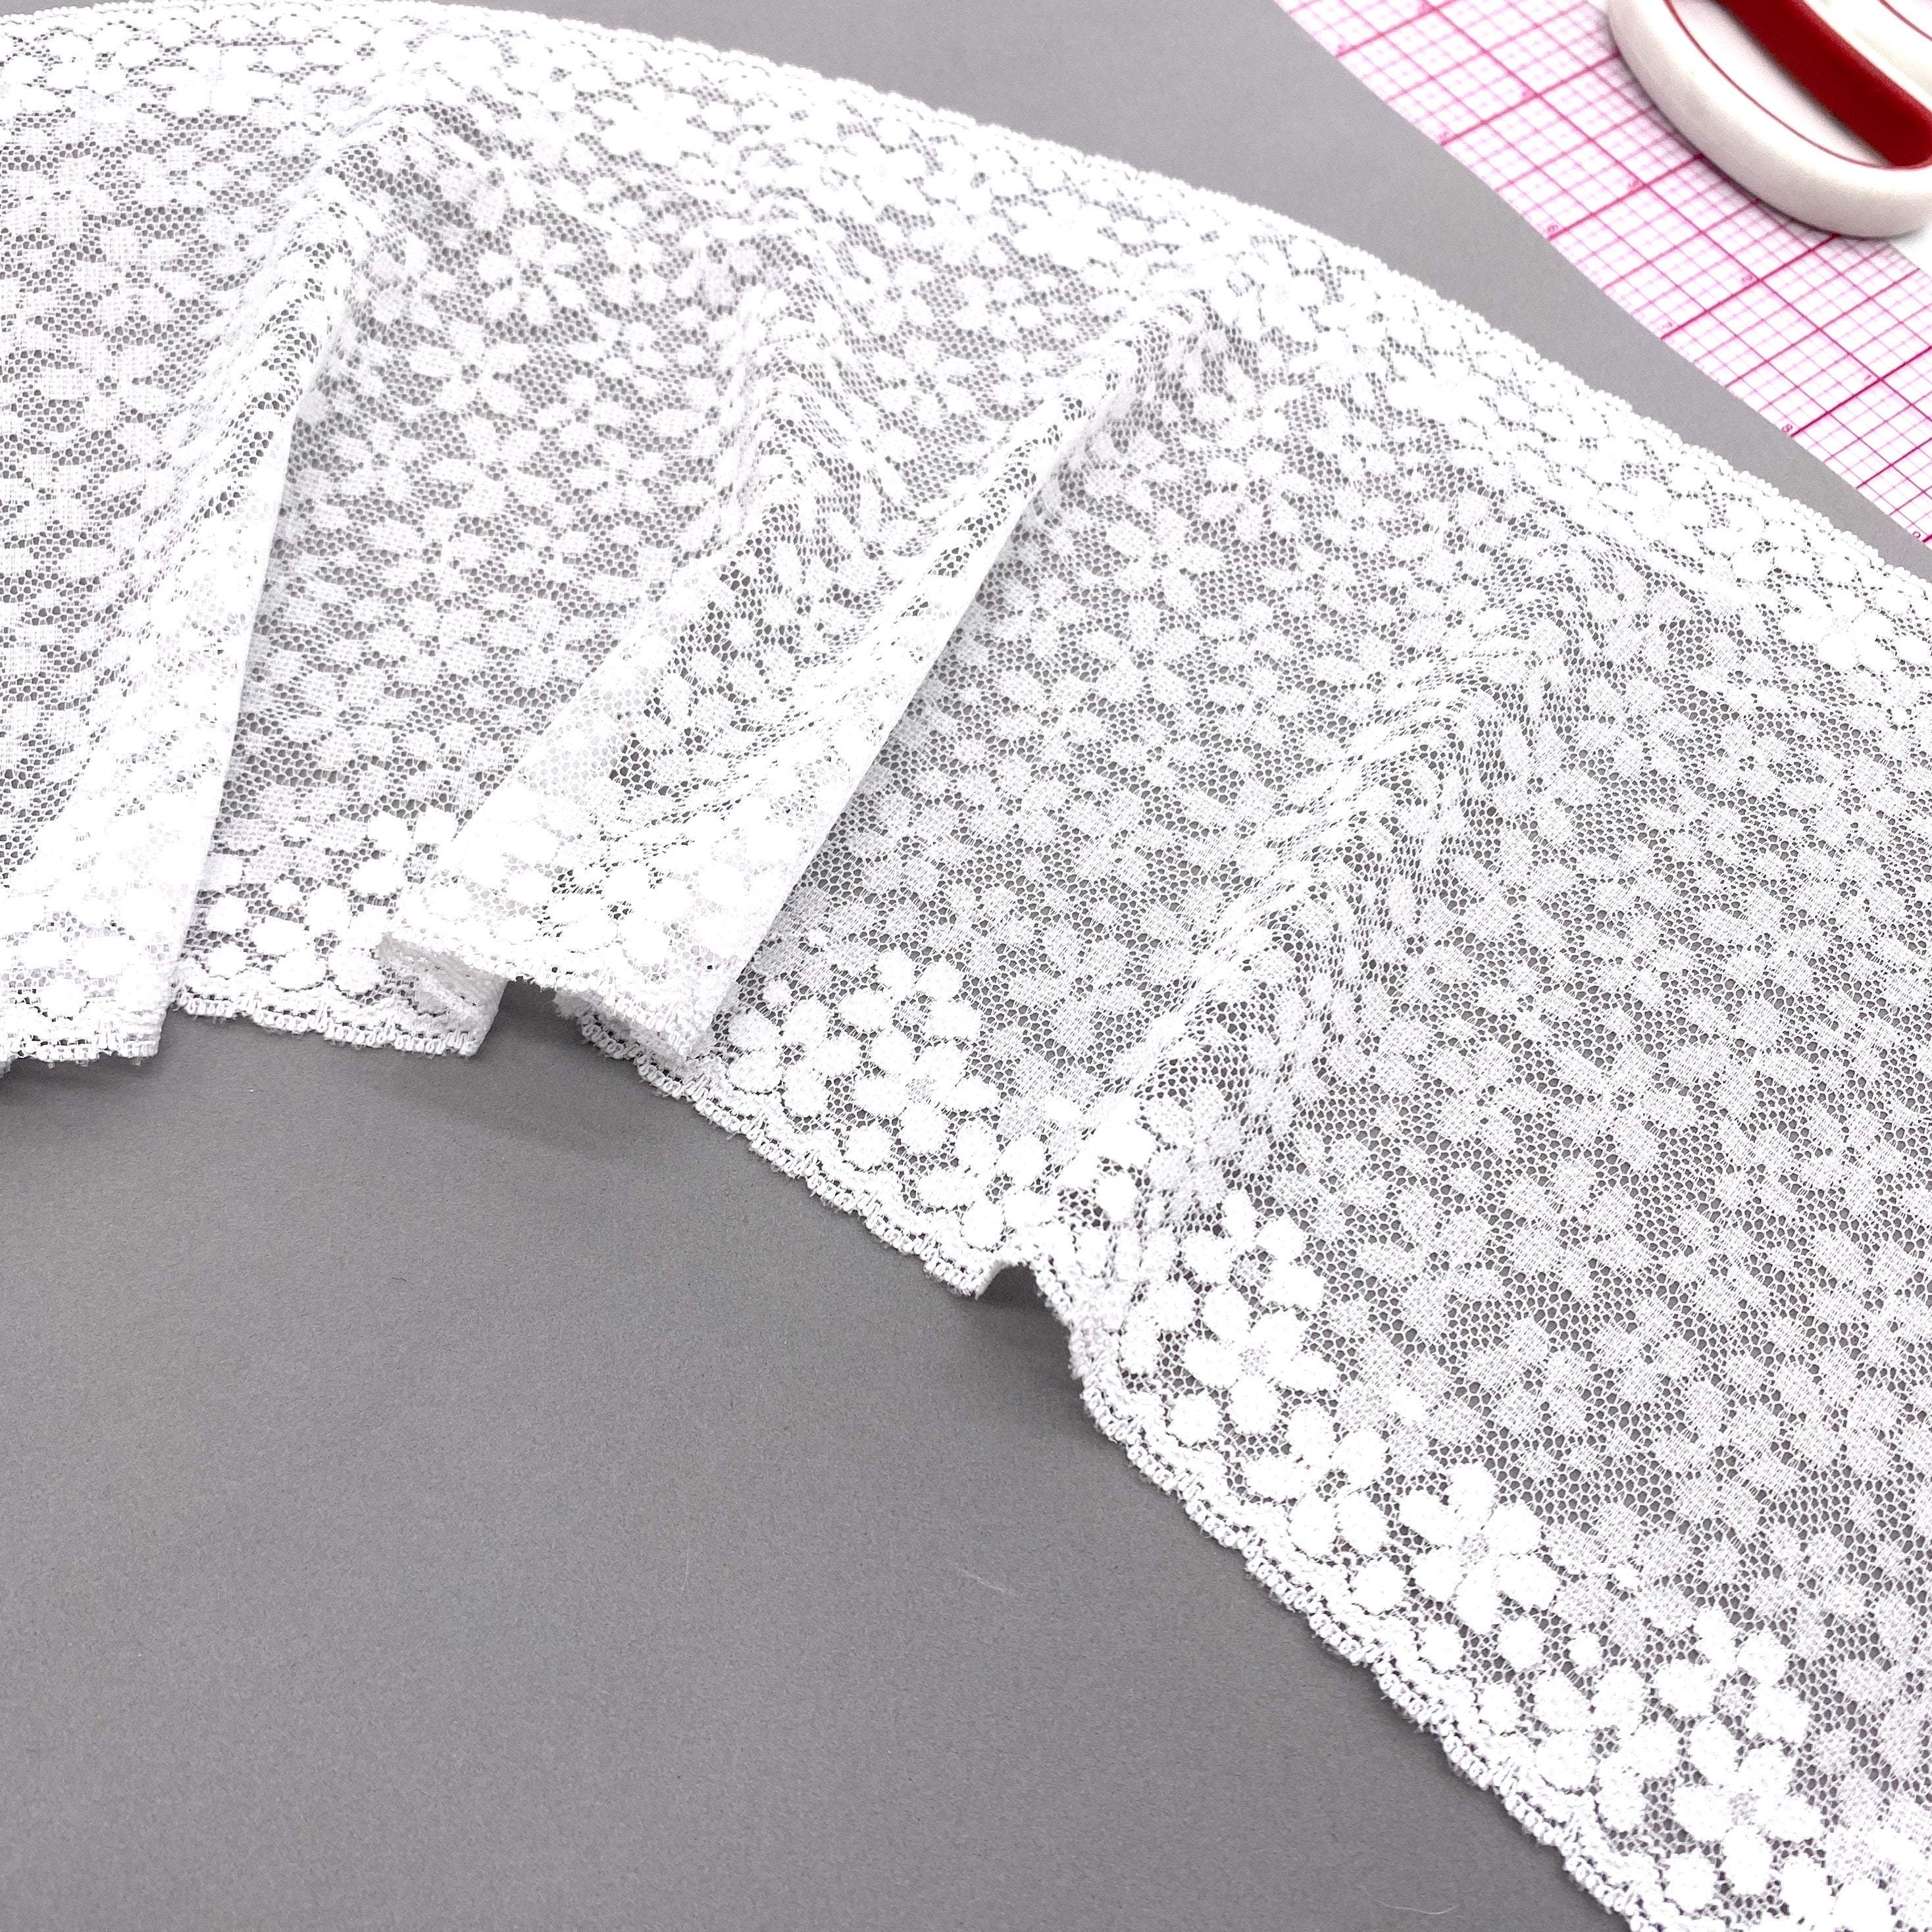 6 3/4" (17cm) Stretch Lace, Soft, High-Quality in White, Black or Ivory- by the 1 yard - Stitch Love Studio